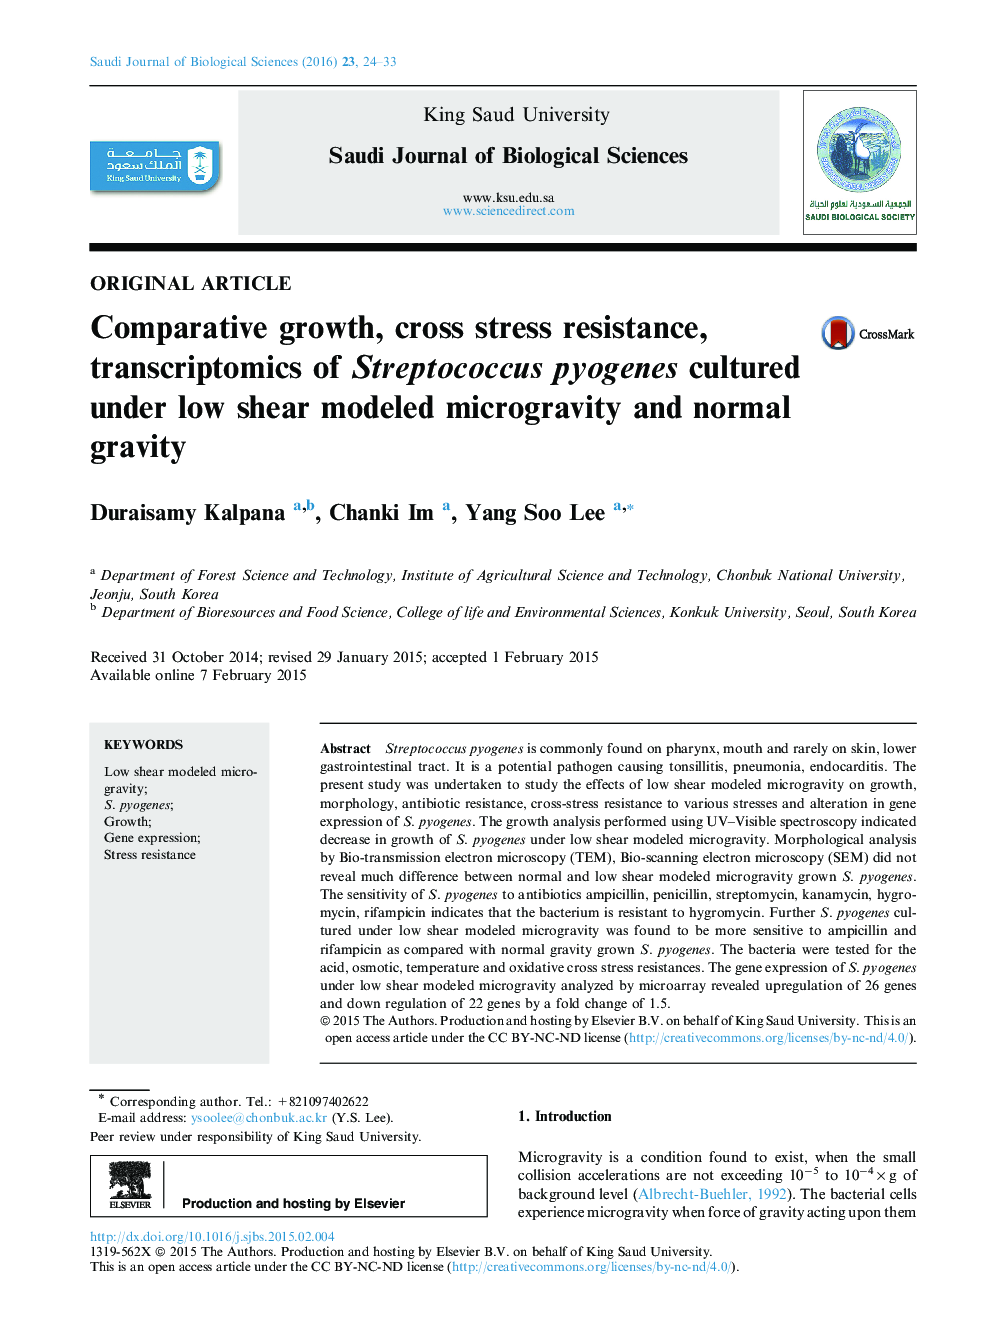 Comparative growth, cross stress resistance, transcriptomics of Streptococcus pyogenes cultured under low shear modeled microgravity and normal gravity 